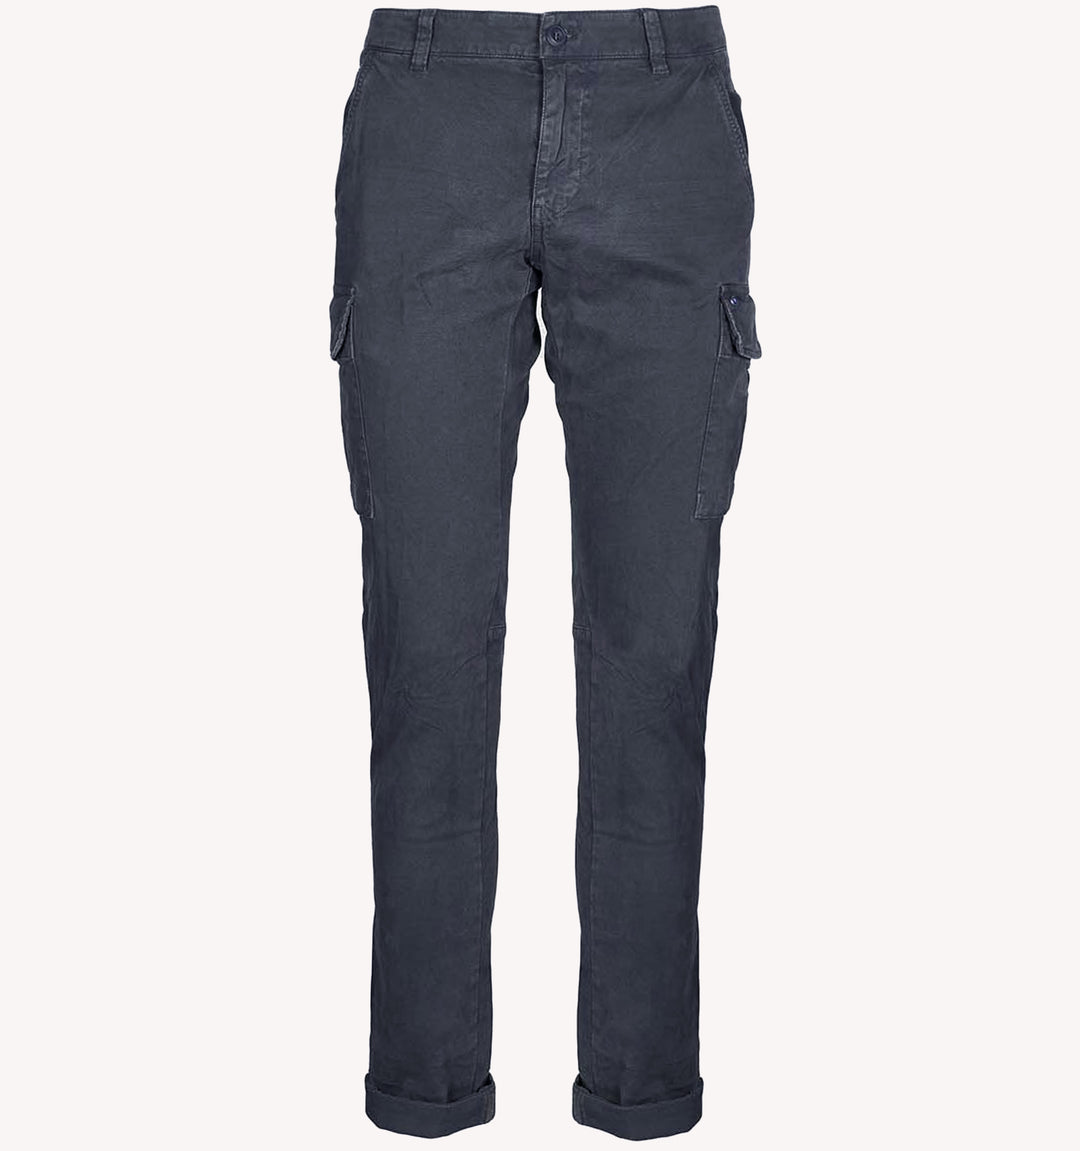 Mason's Chile Cargo Sport Trouser in Vintage Navy